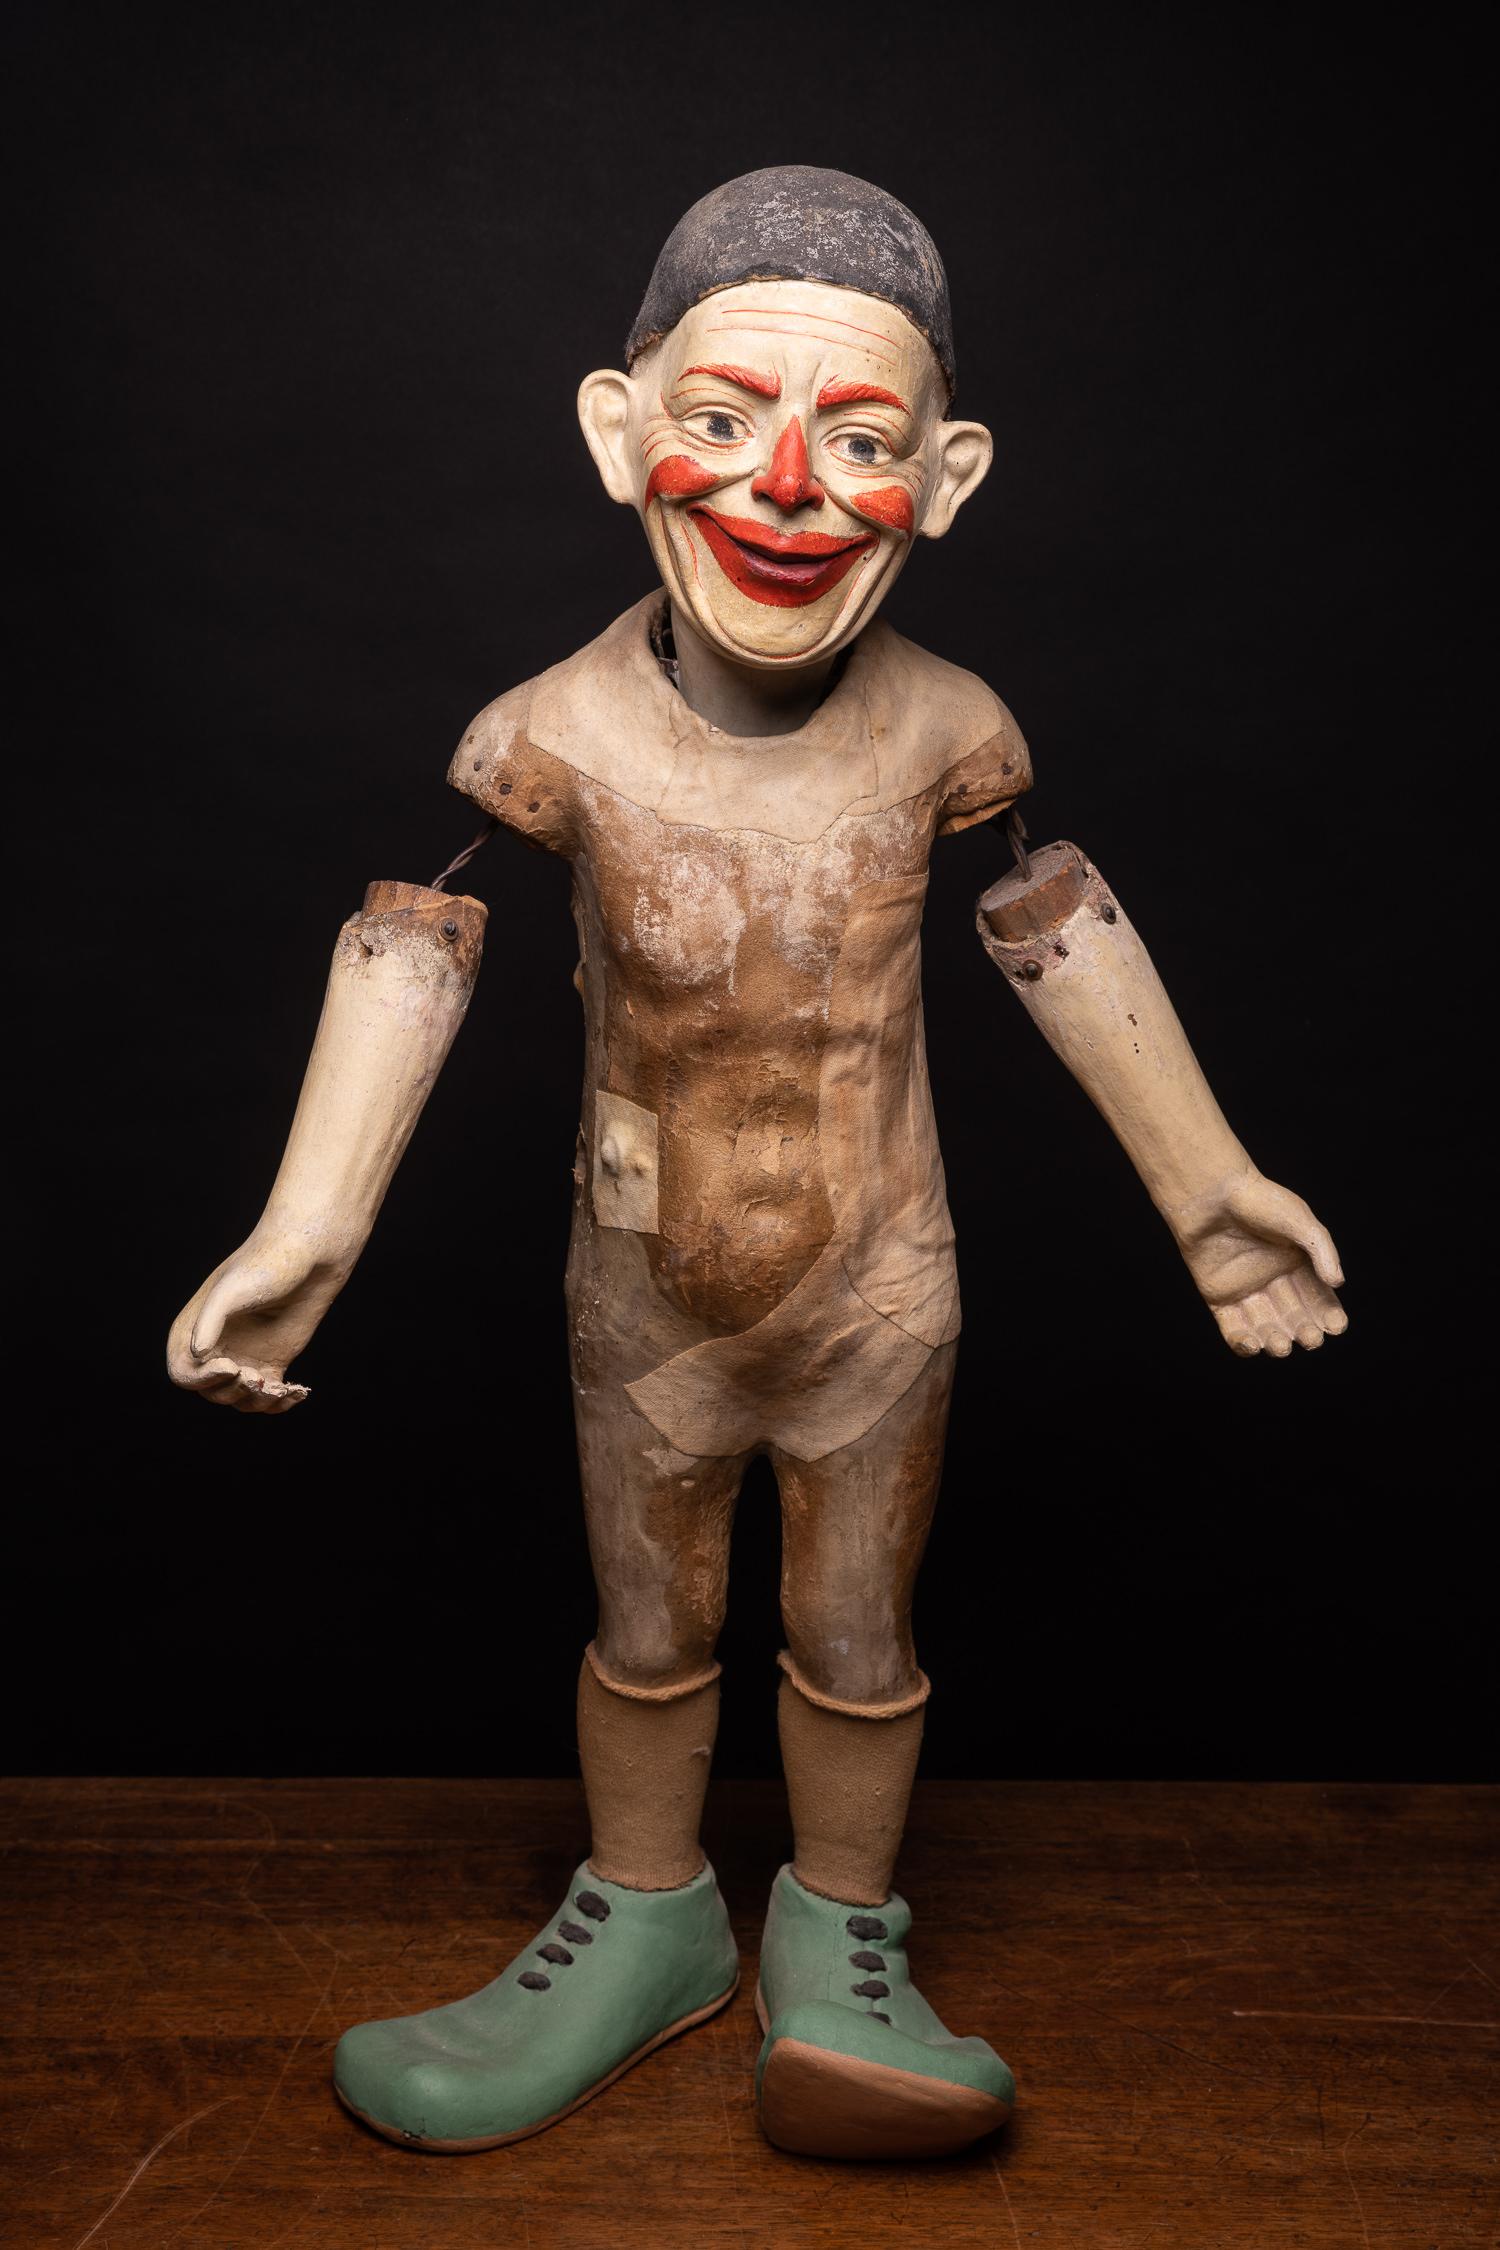 Antique Circus Clown with poseable arms and caracterful smile - Art by Unknown